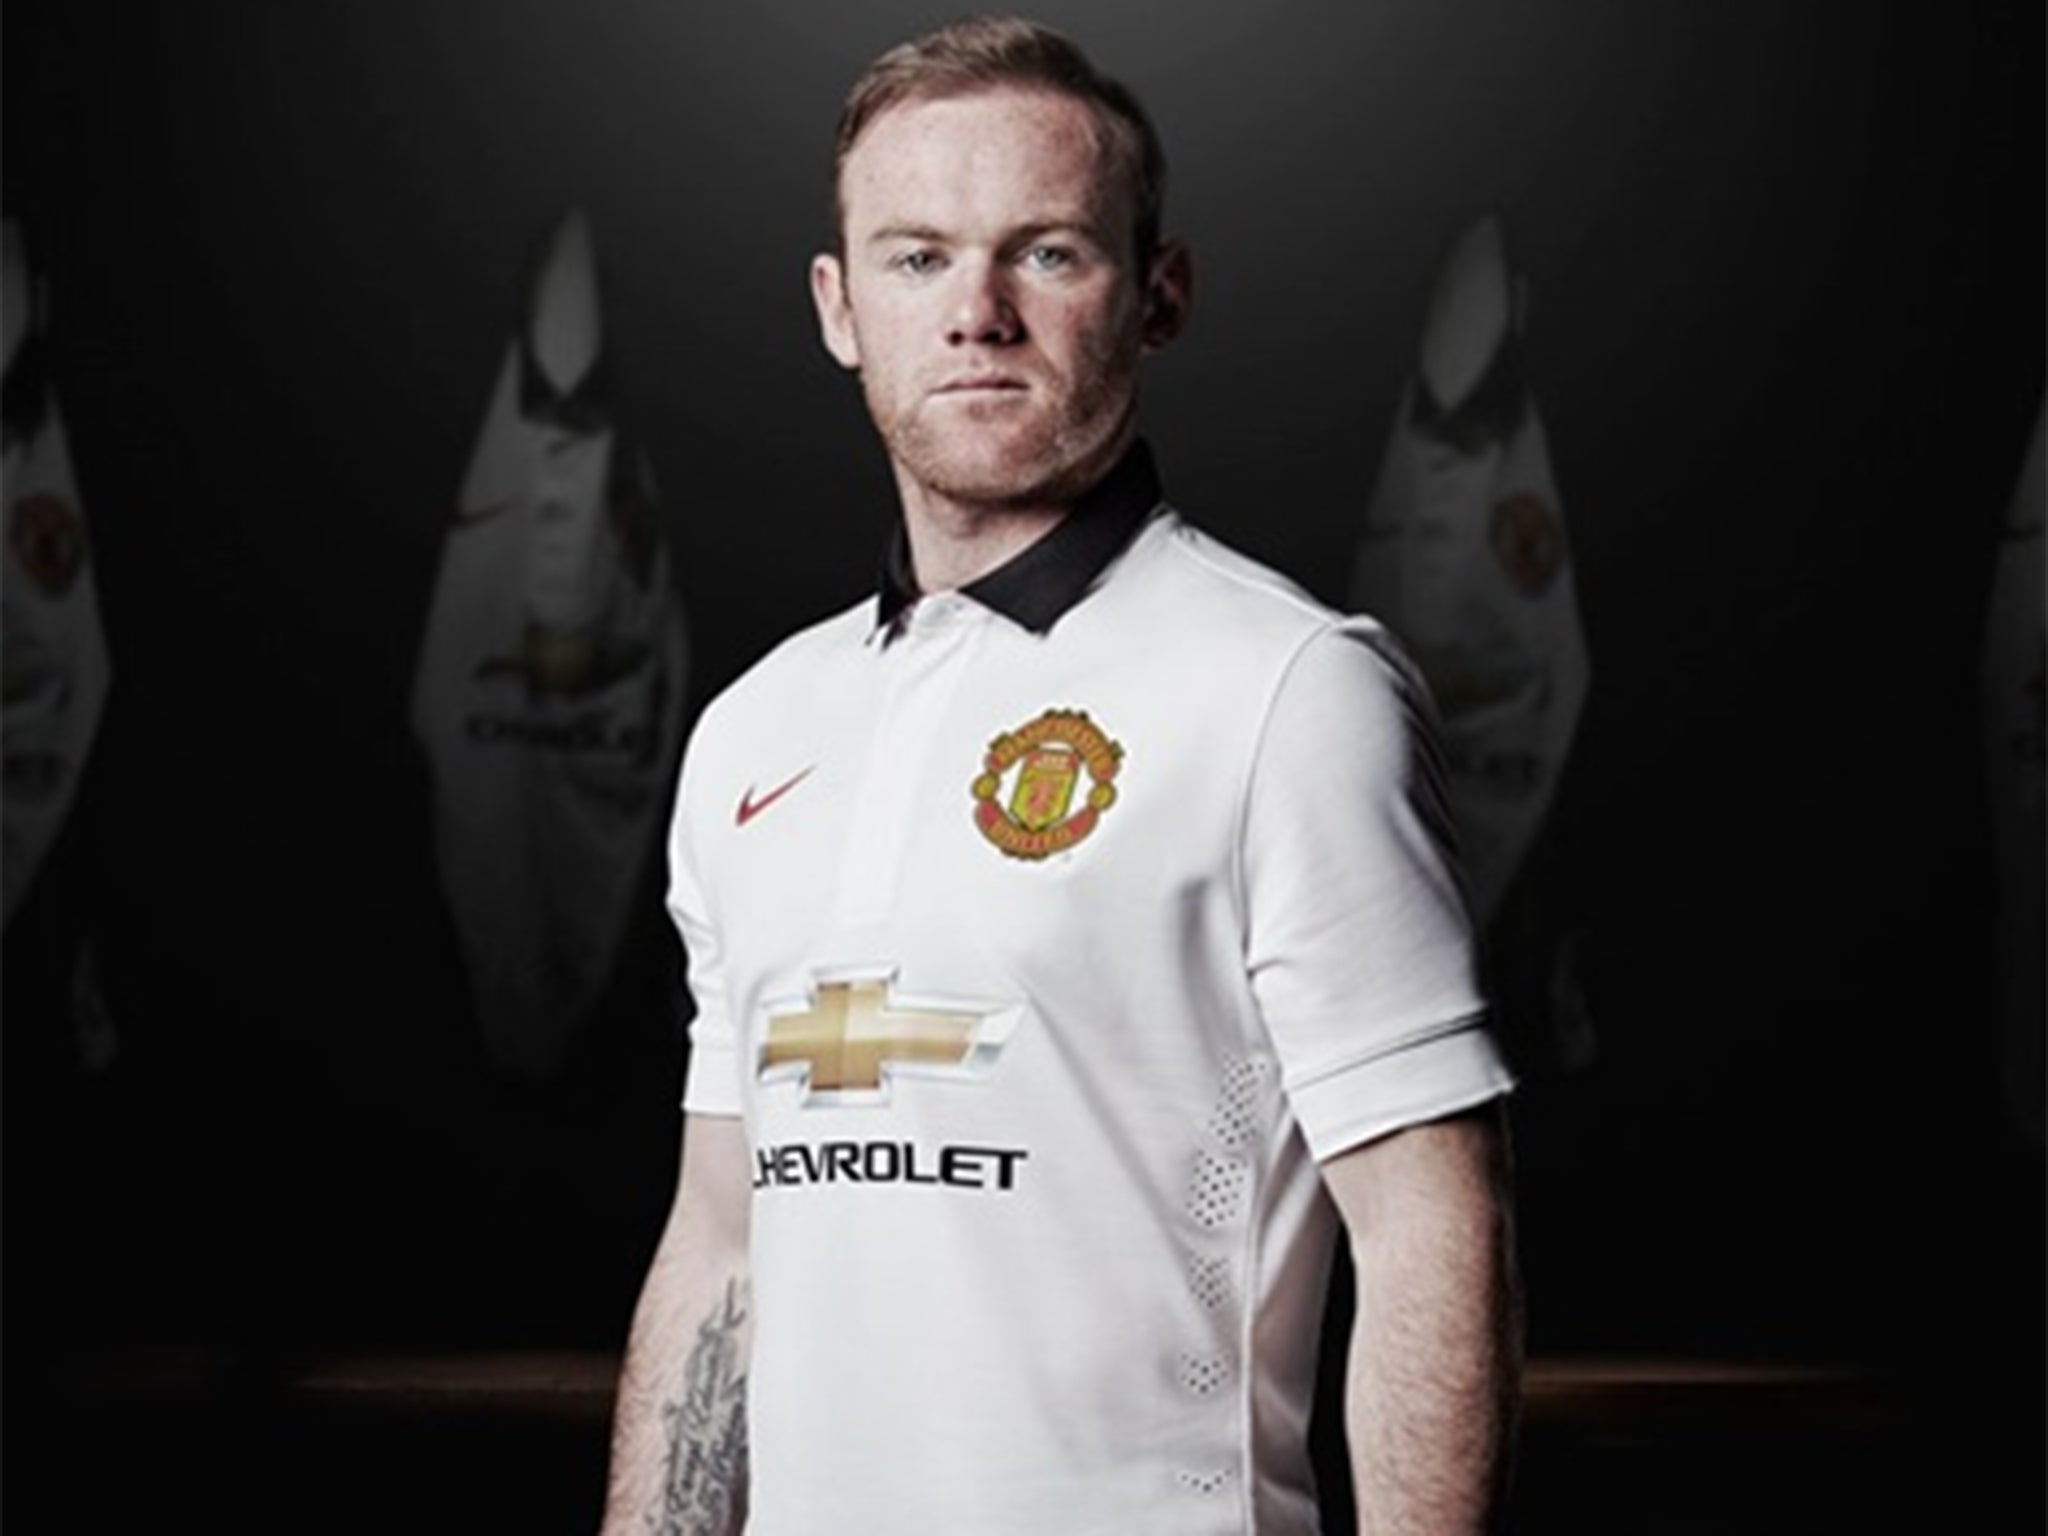 Wayne Rooney in the new Manchester United away kit